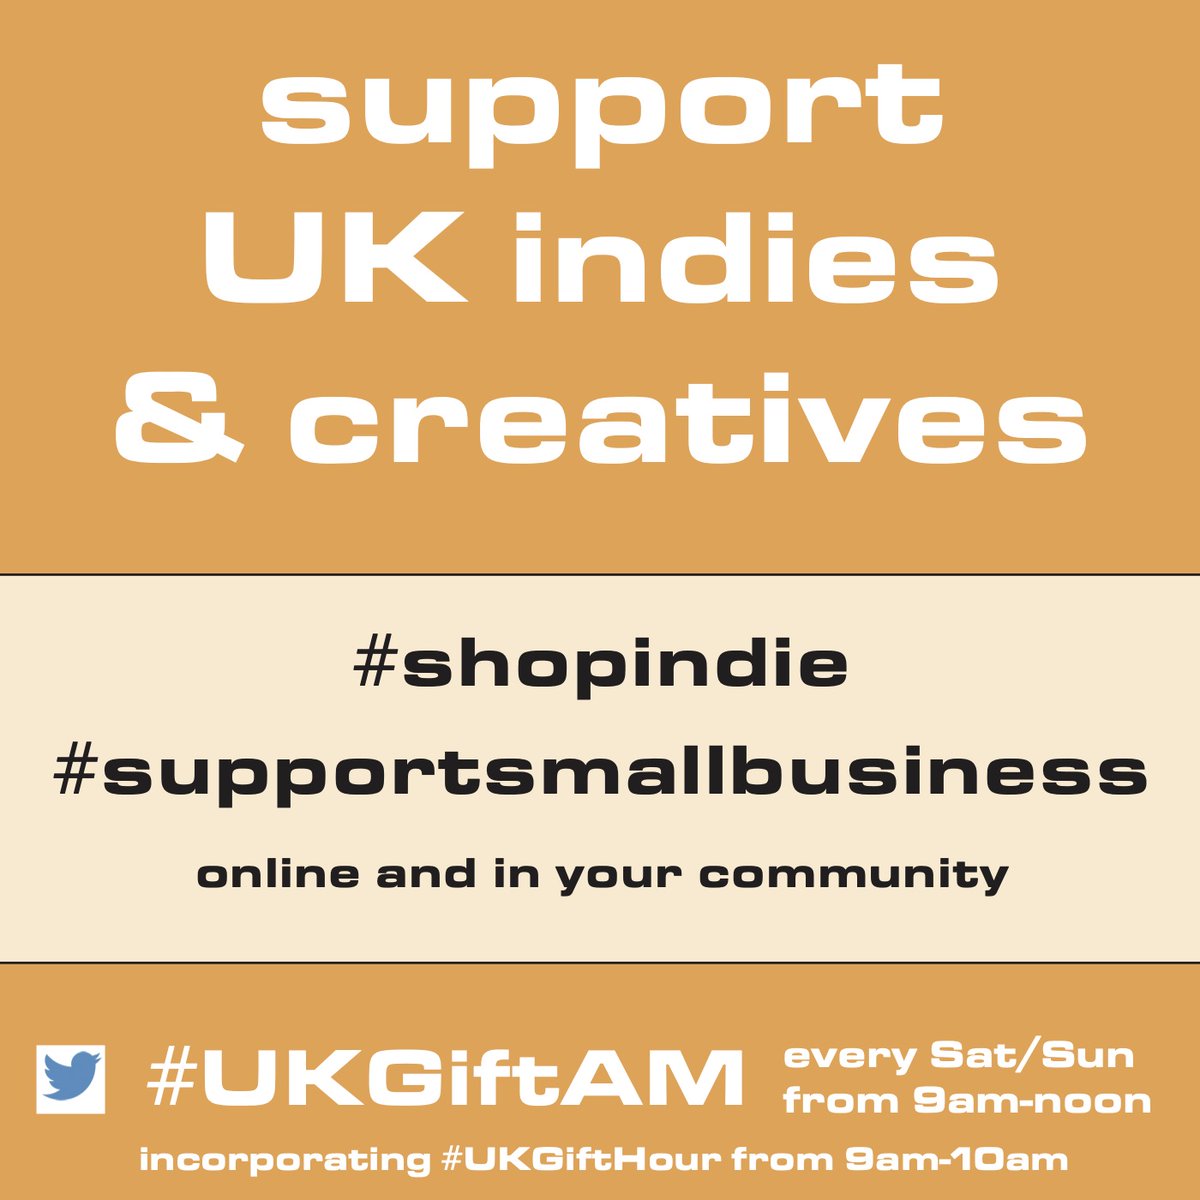 Do your gifting the #supportsmallbusiness way - it gives you more choice, value and time. #shopindie for #giftideas that surprise and delight with UK indies & creatives on #UKGiftHour #UKGIftAM every weekend morning. Always welcome to look around! 🤗🎁 #planahead #EarlyBiz